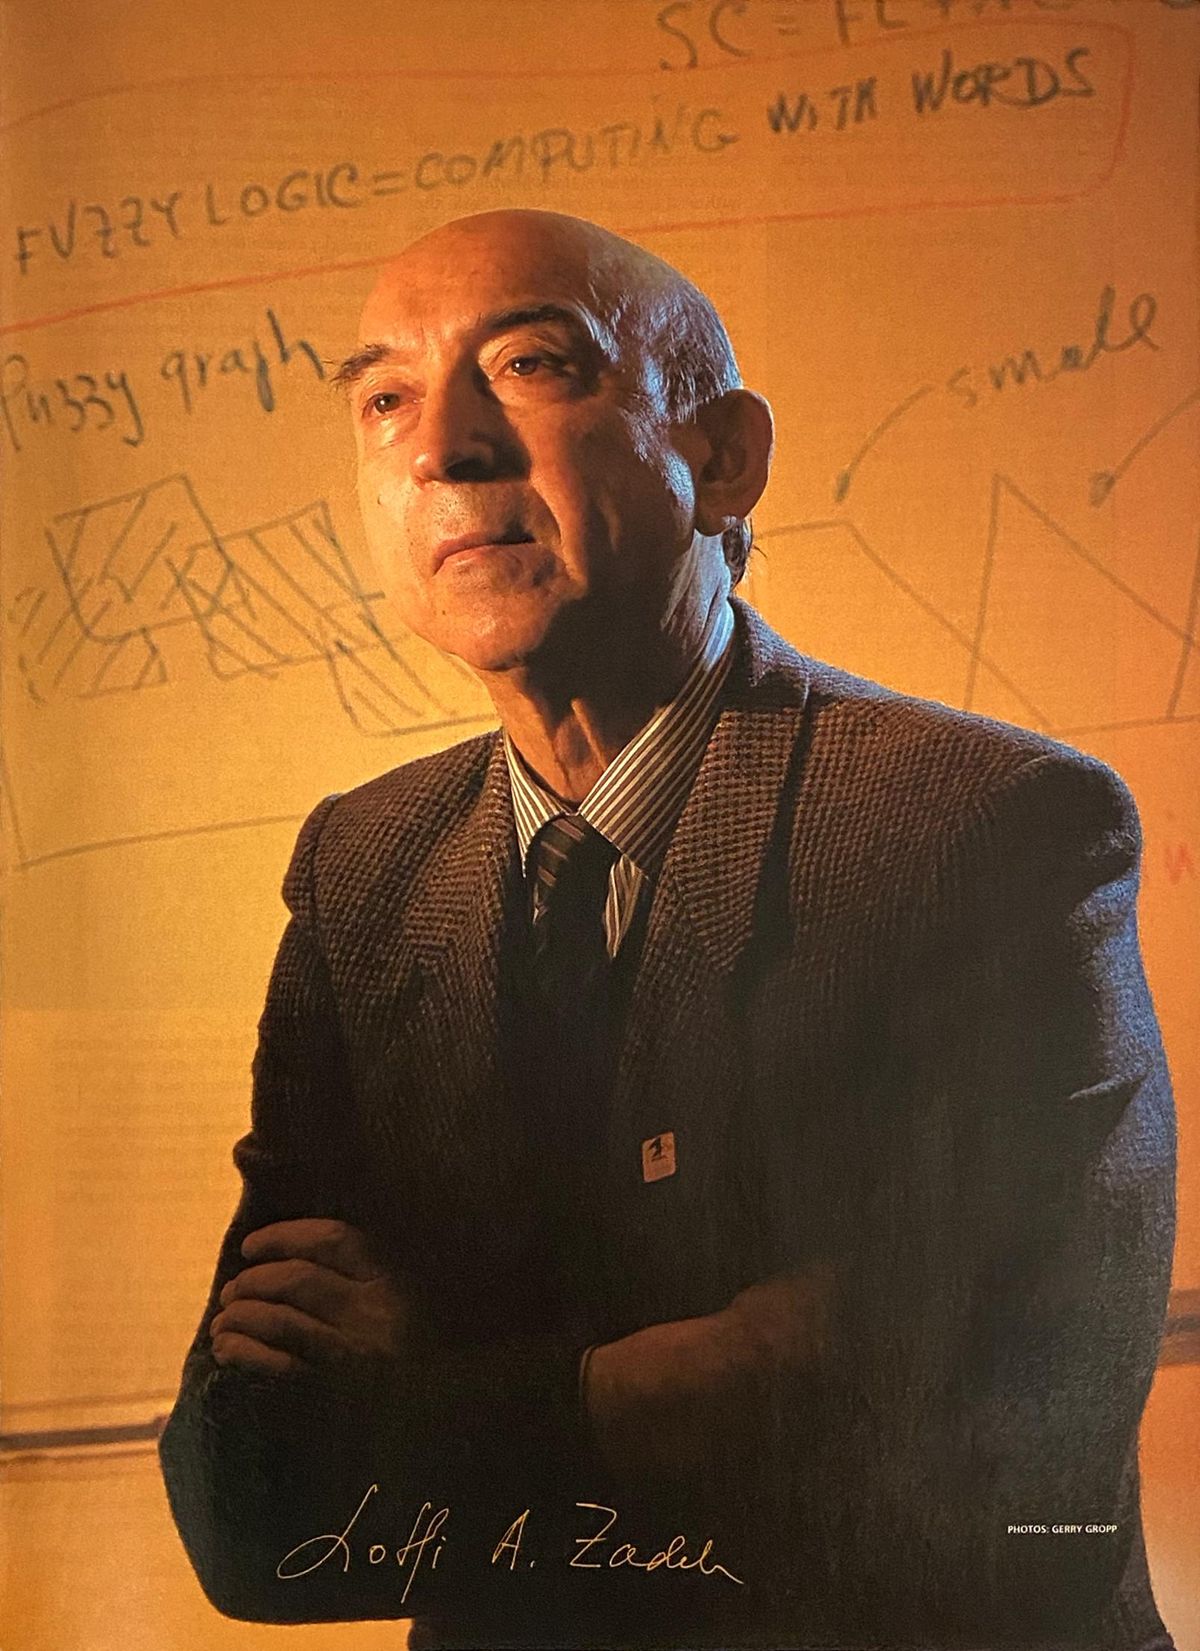 Man standing with arms crosssed in front of whiteboard, text visible reading fuzzy logic = computing with words, signed at bottom Lotfi A. Zadeh